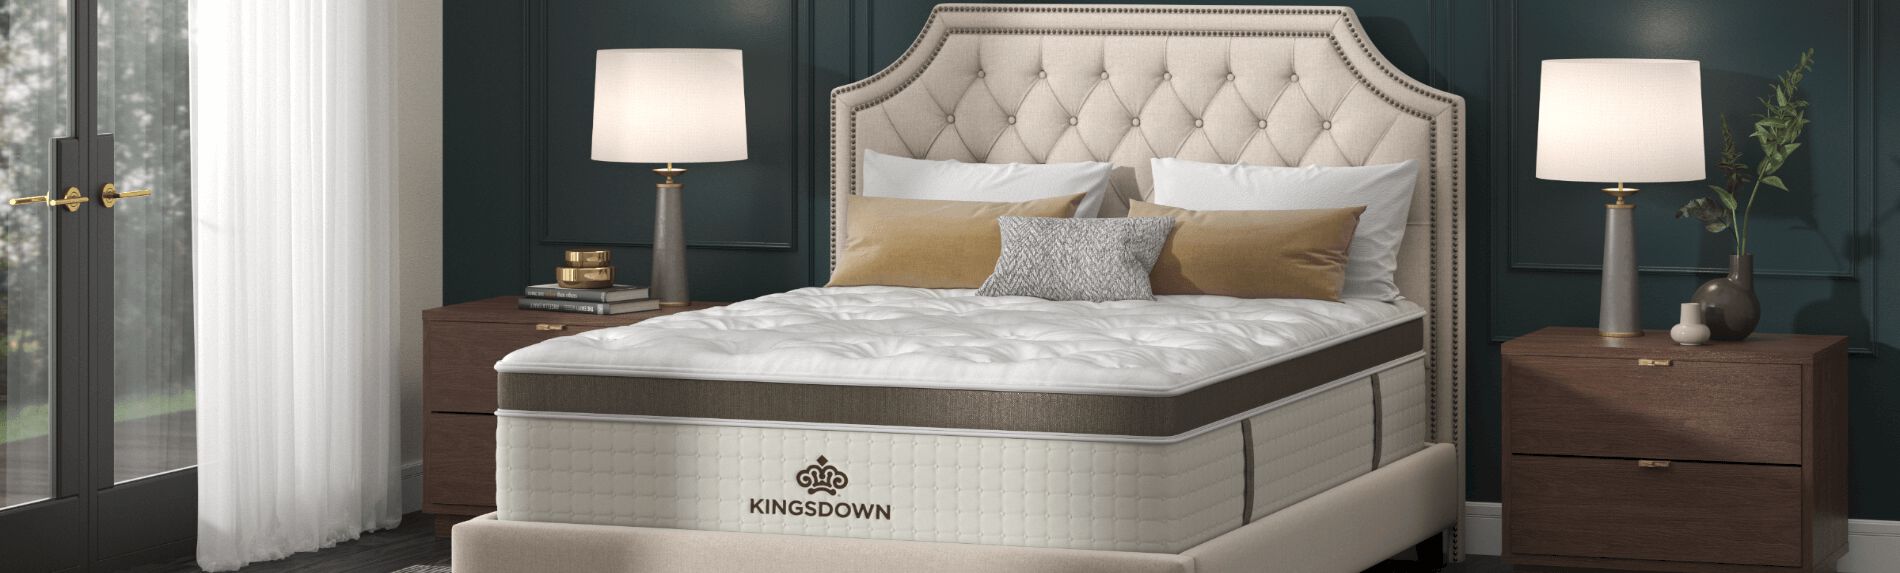 Is Kingsdown mattress the right choice for you?